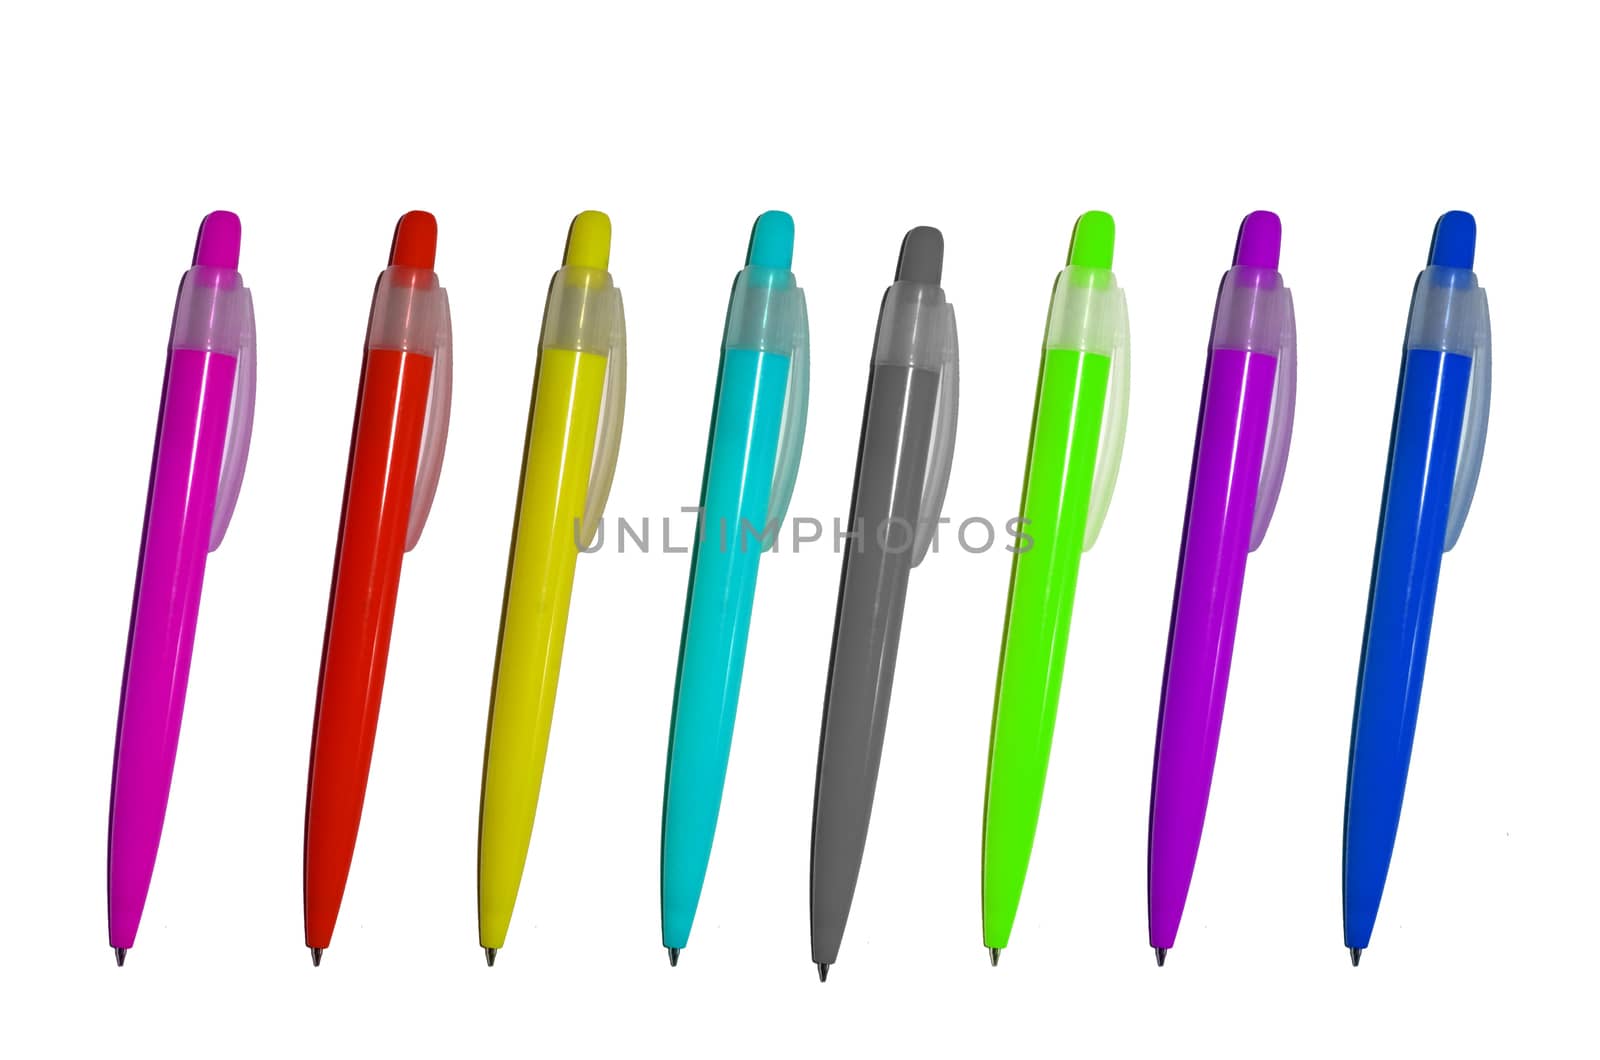 Colourful pens and pencils in a blue glass isolated on a white background by siiixth